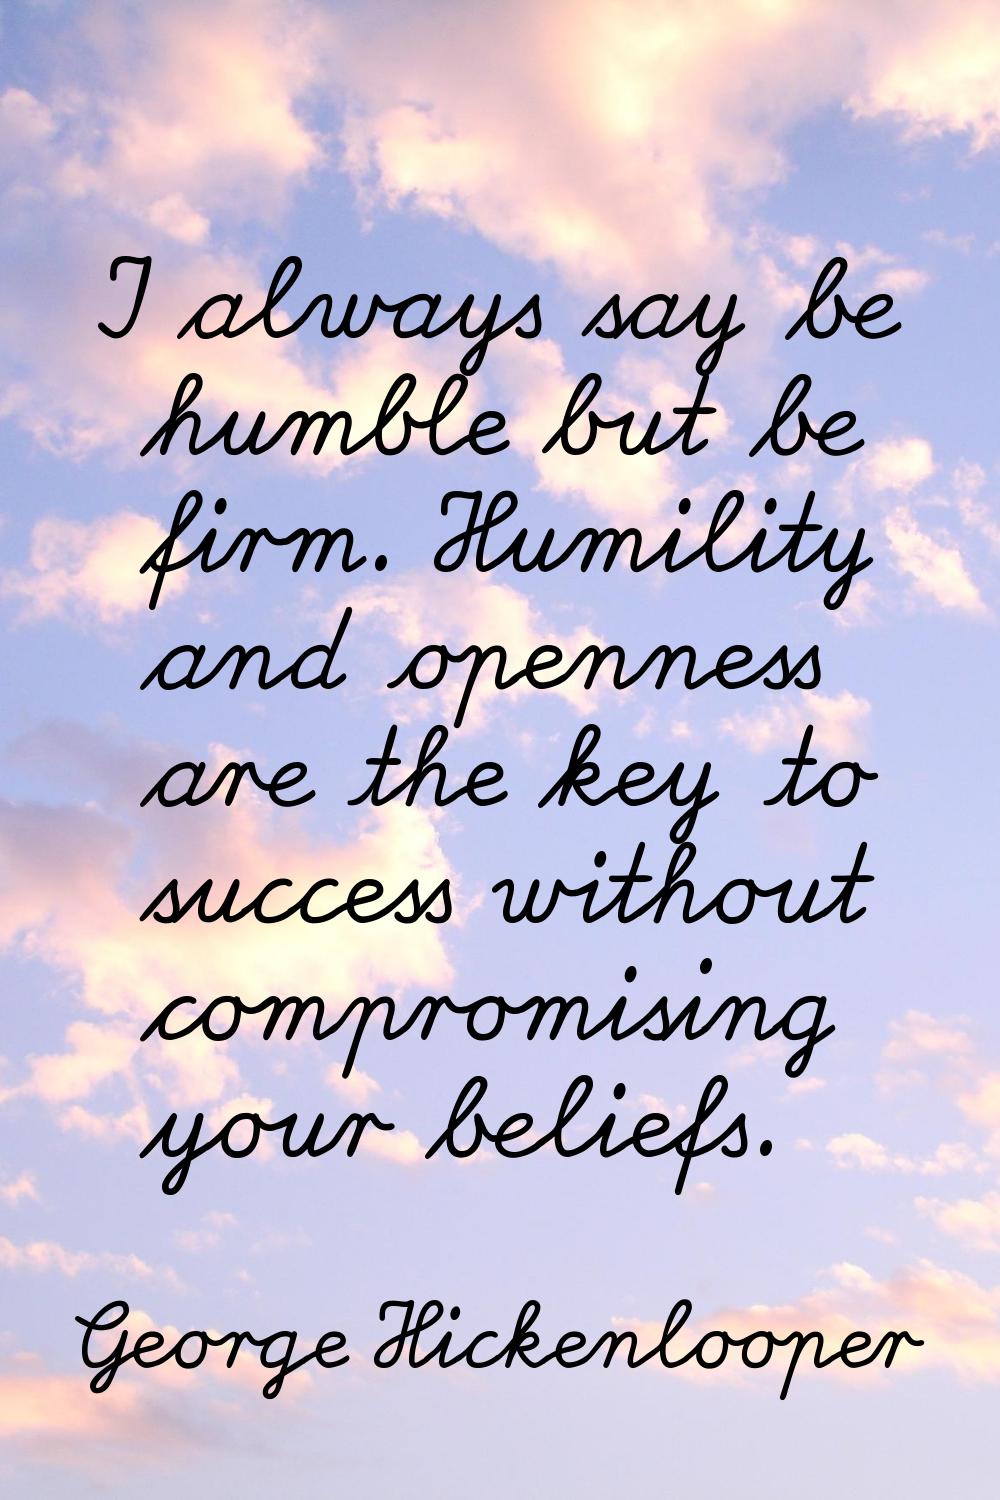 I always say be humble but be firm. Humility and openness are the key to success without compromisi